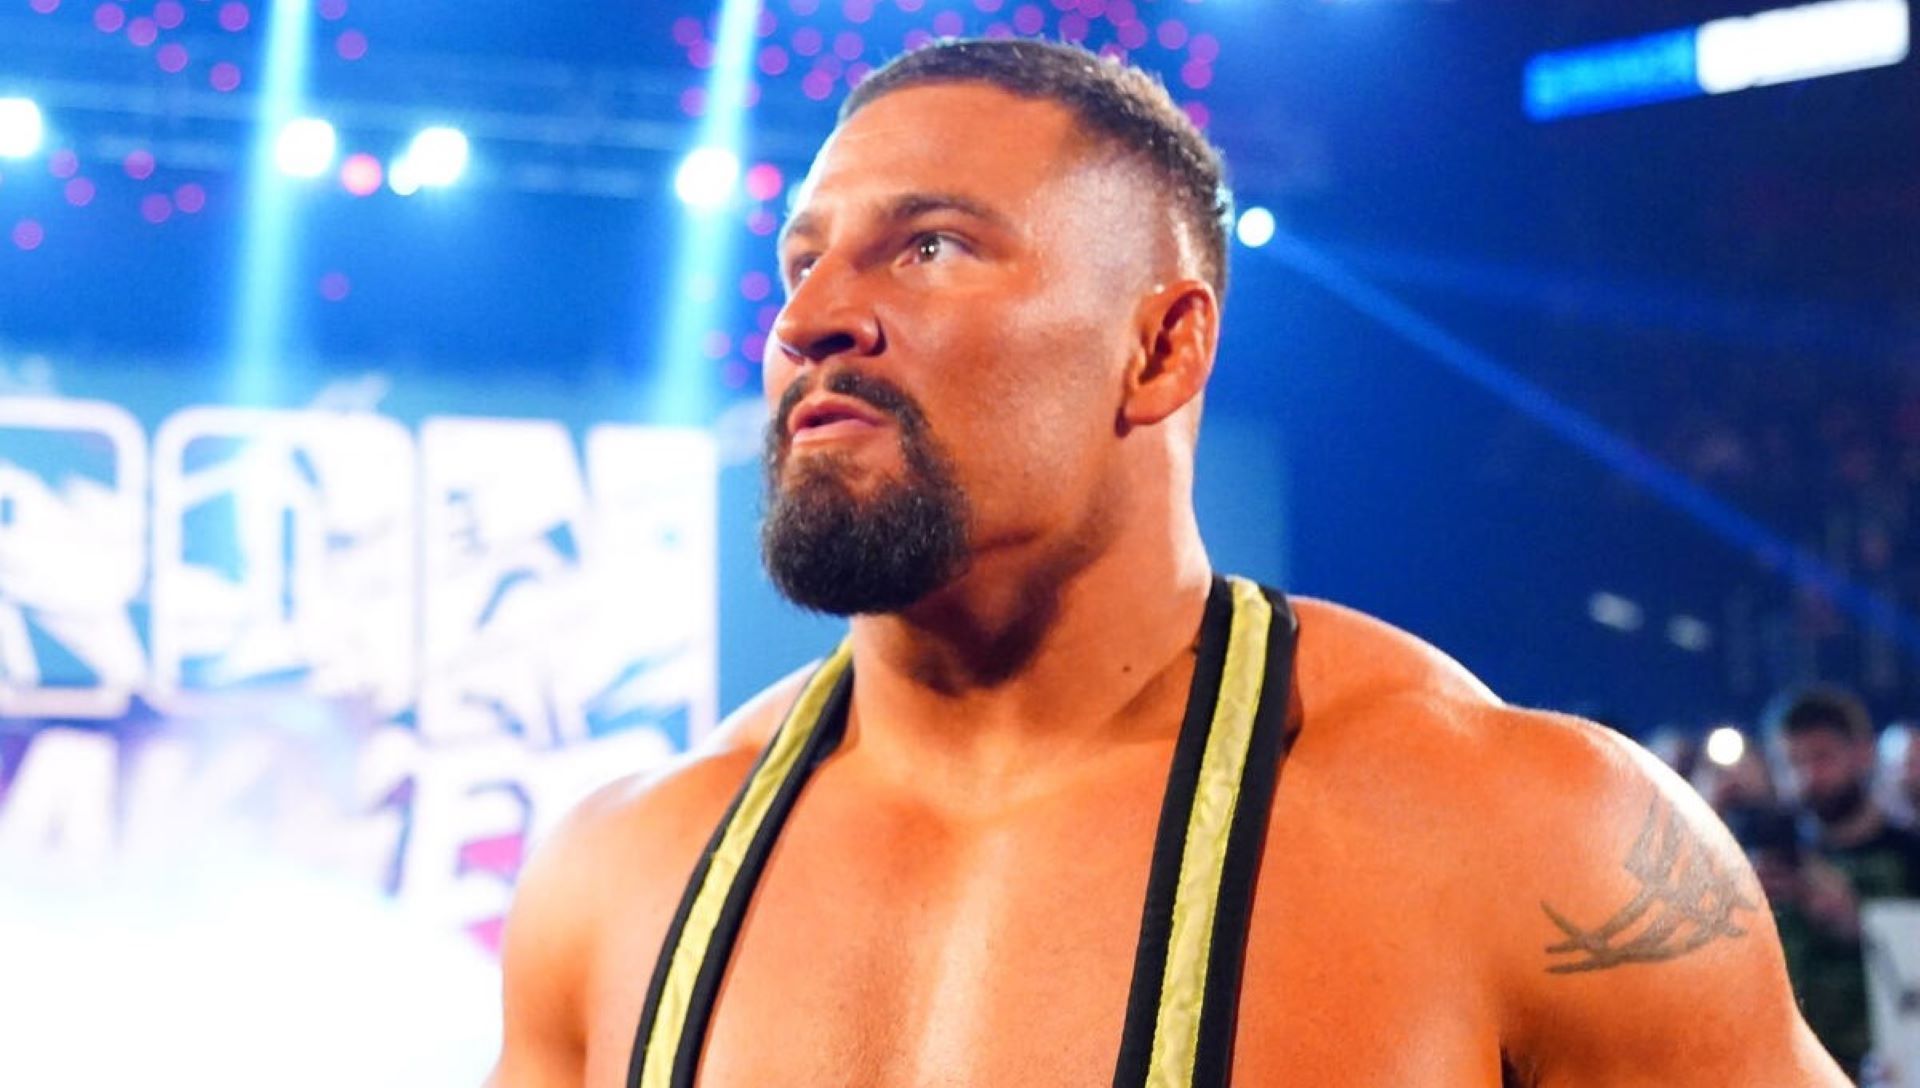 Gold could be in the future of the former two-time NXT Champion.